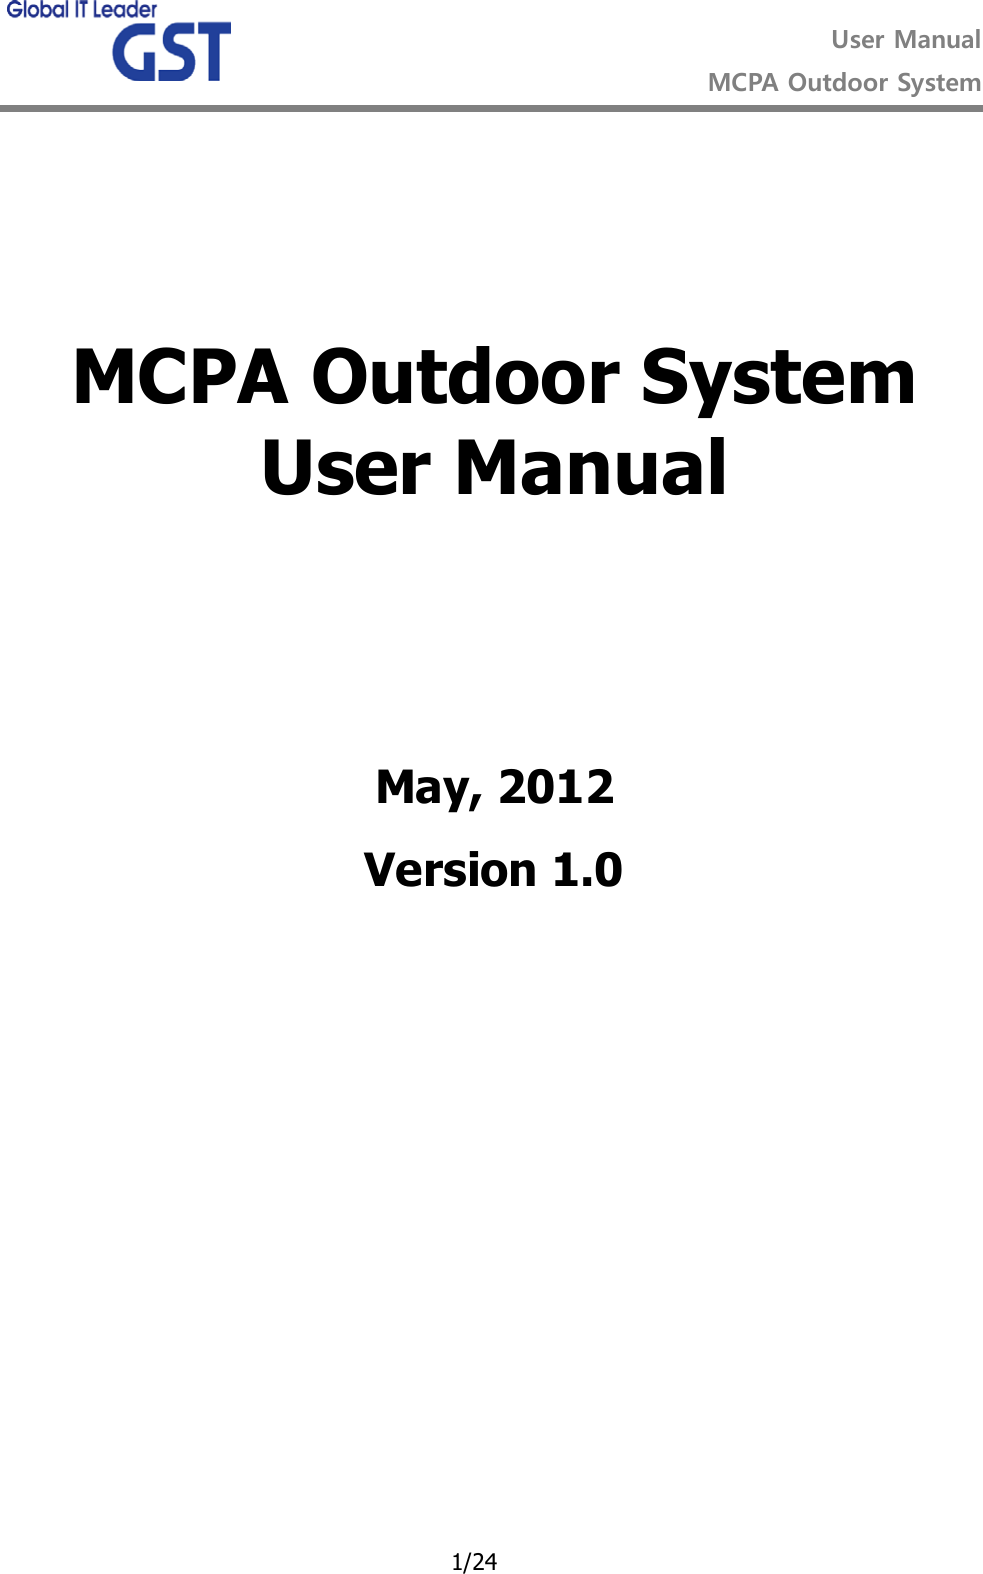  User Manual MCPA Outdoor System   1/24      MCPA Outdoor System User Manual       May, 2012 Version 1.0  